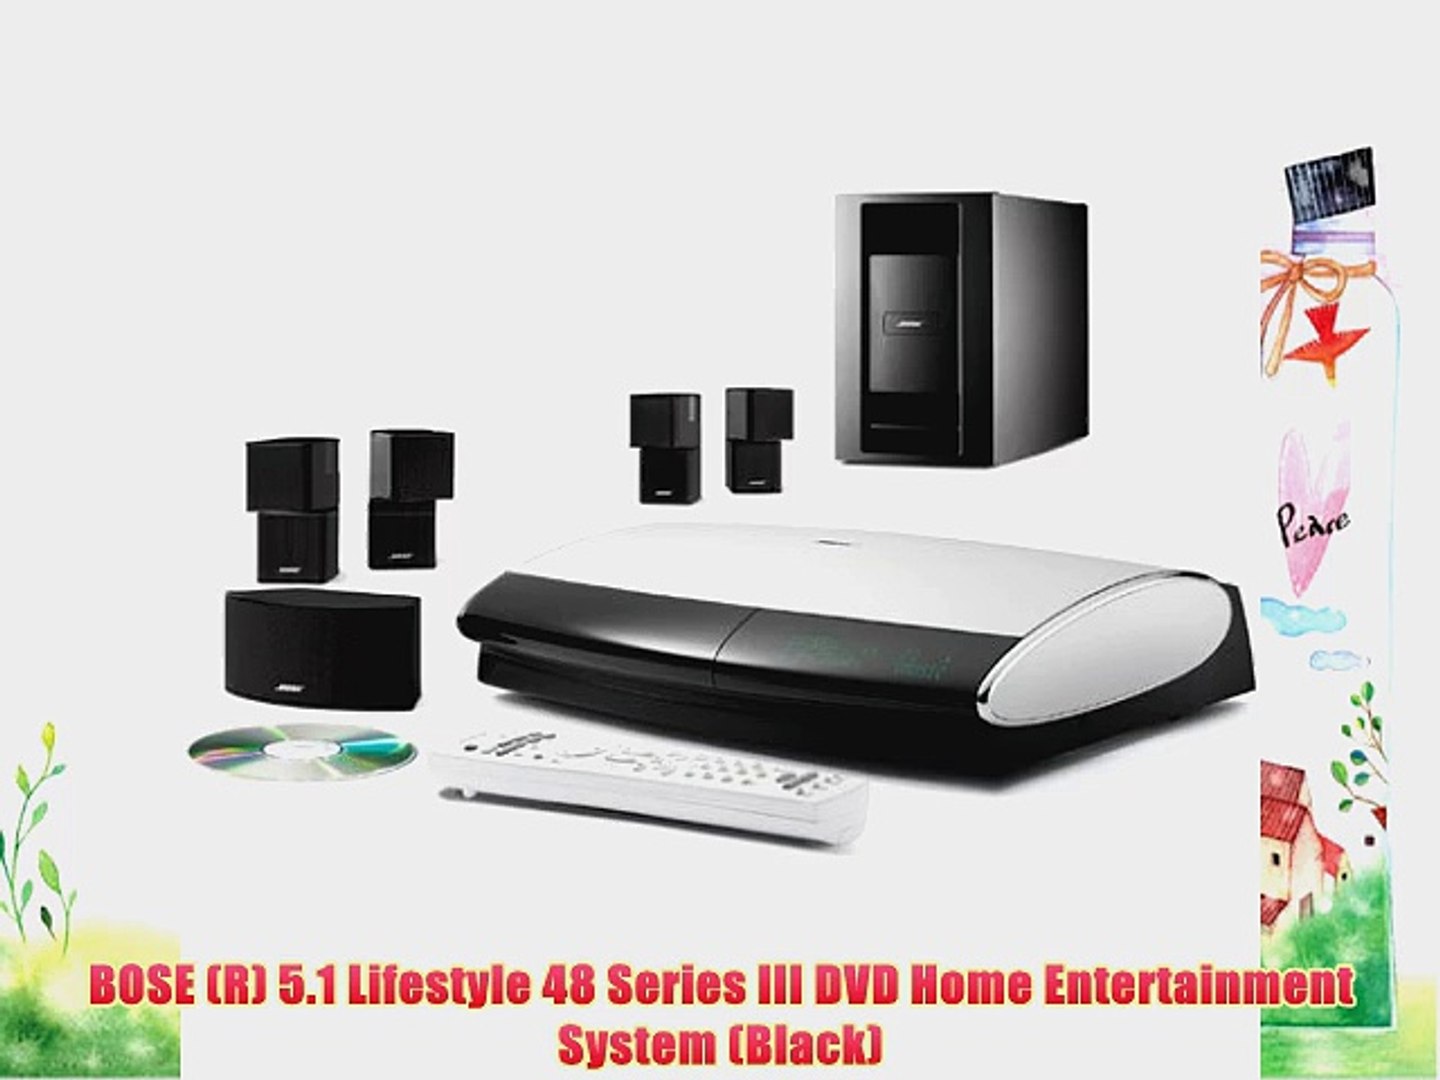 BOSE (R) 5.1 Lifestyle 48 Series III DVD Home Entertainment System (Black)  - video Dailymotion